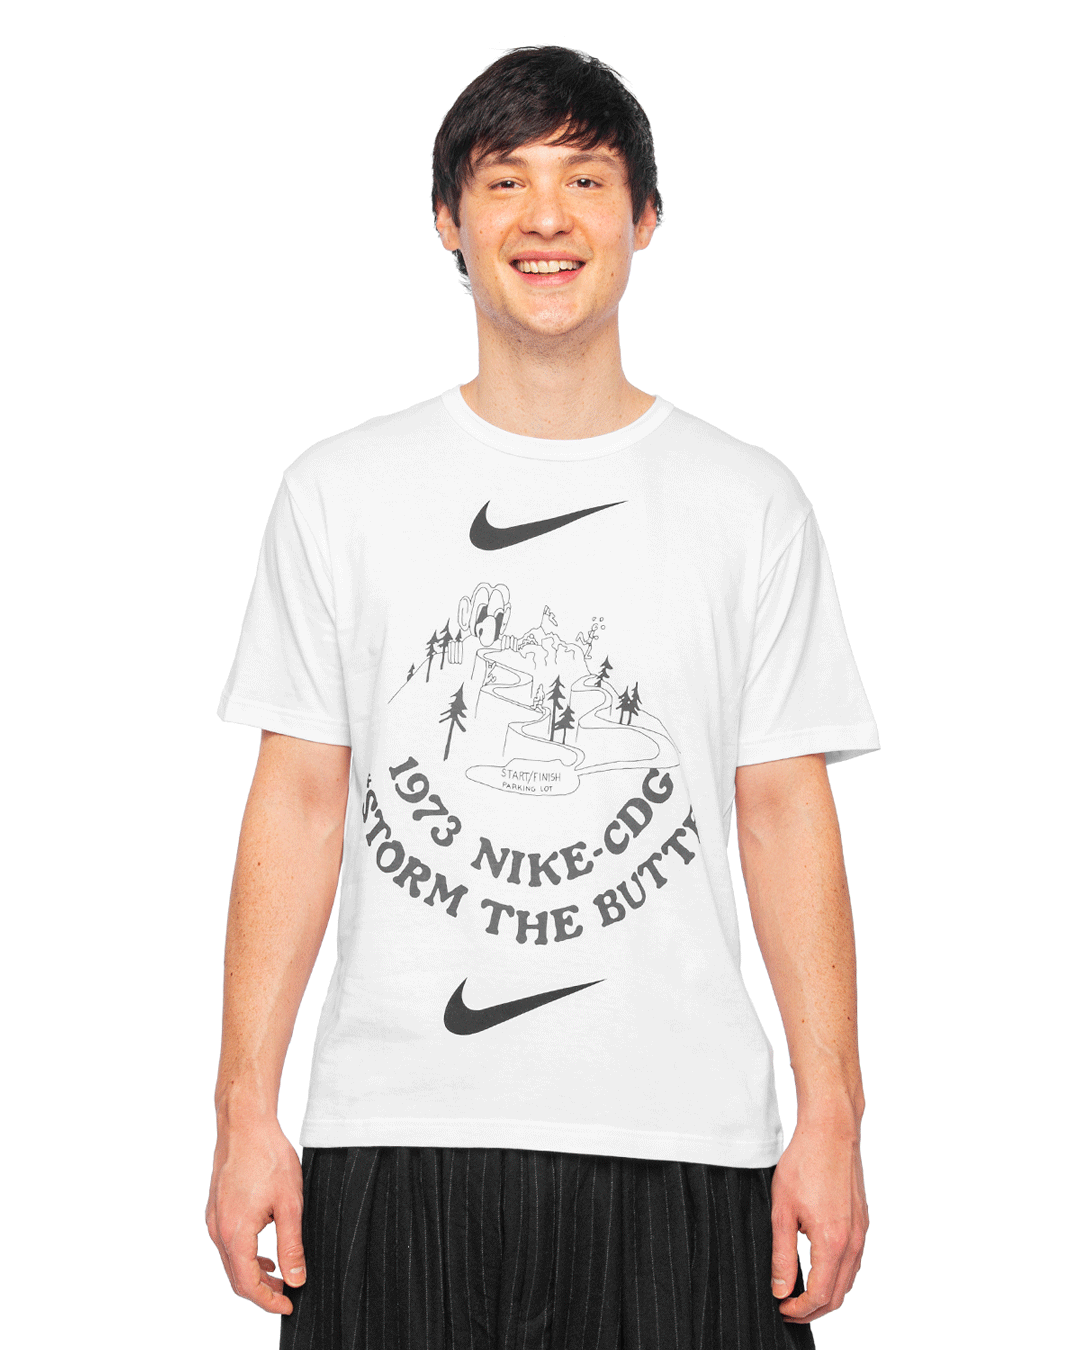 CDG X NIKE 'Storm the Butte' Tee